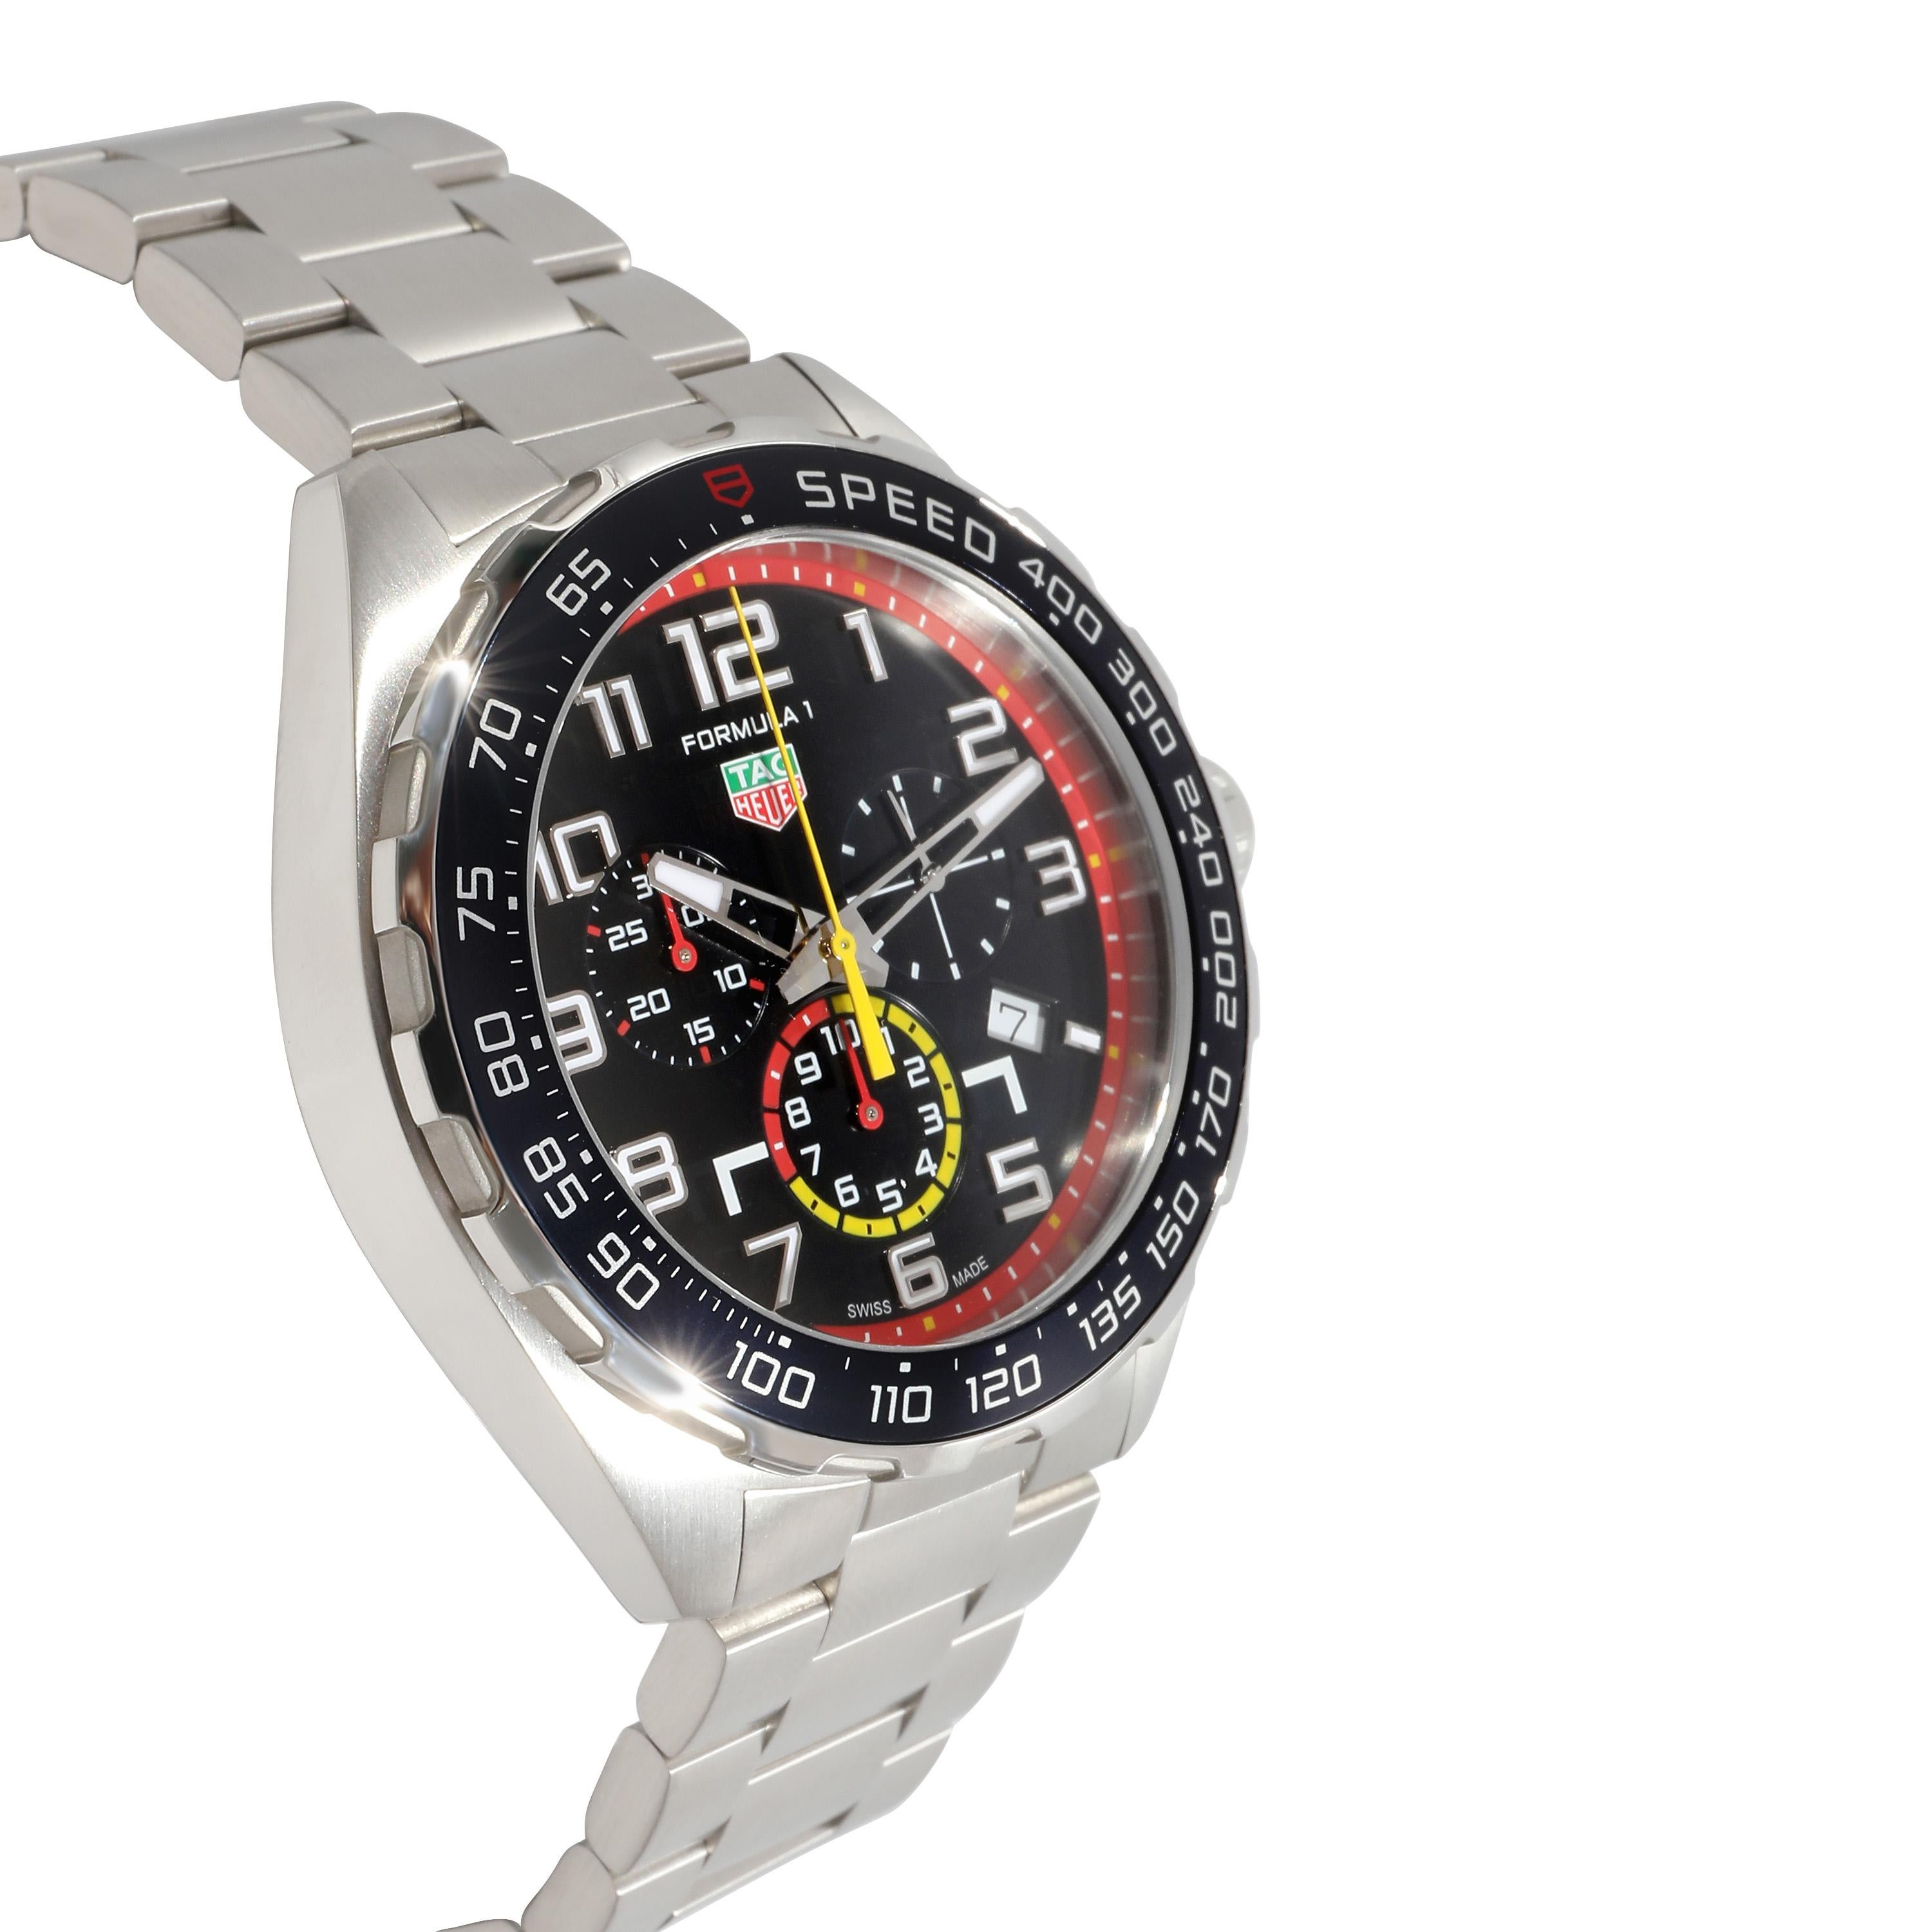 tag heuer indy 500 limited edition 2008